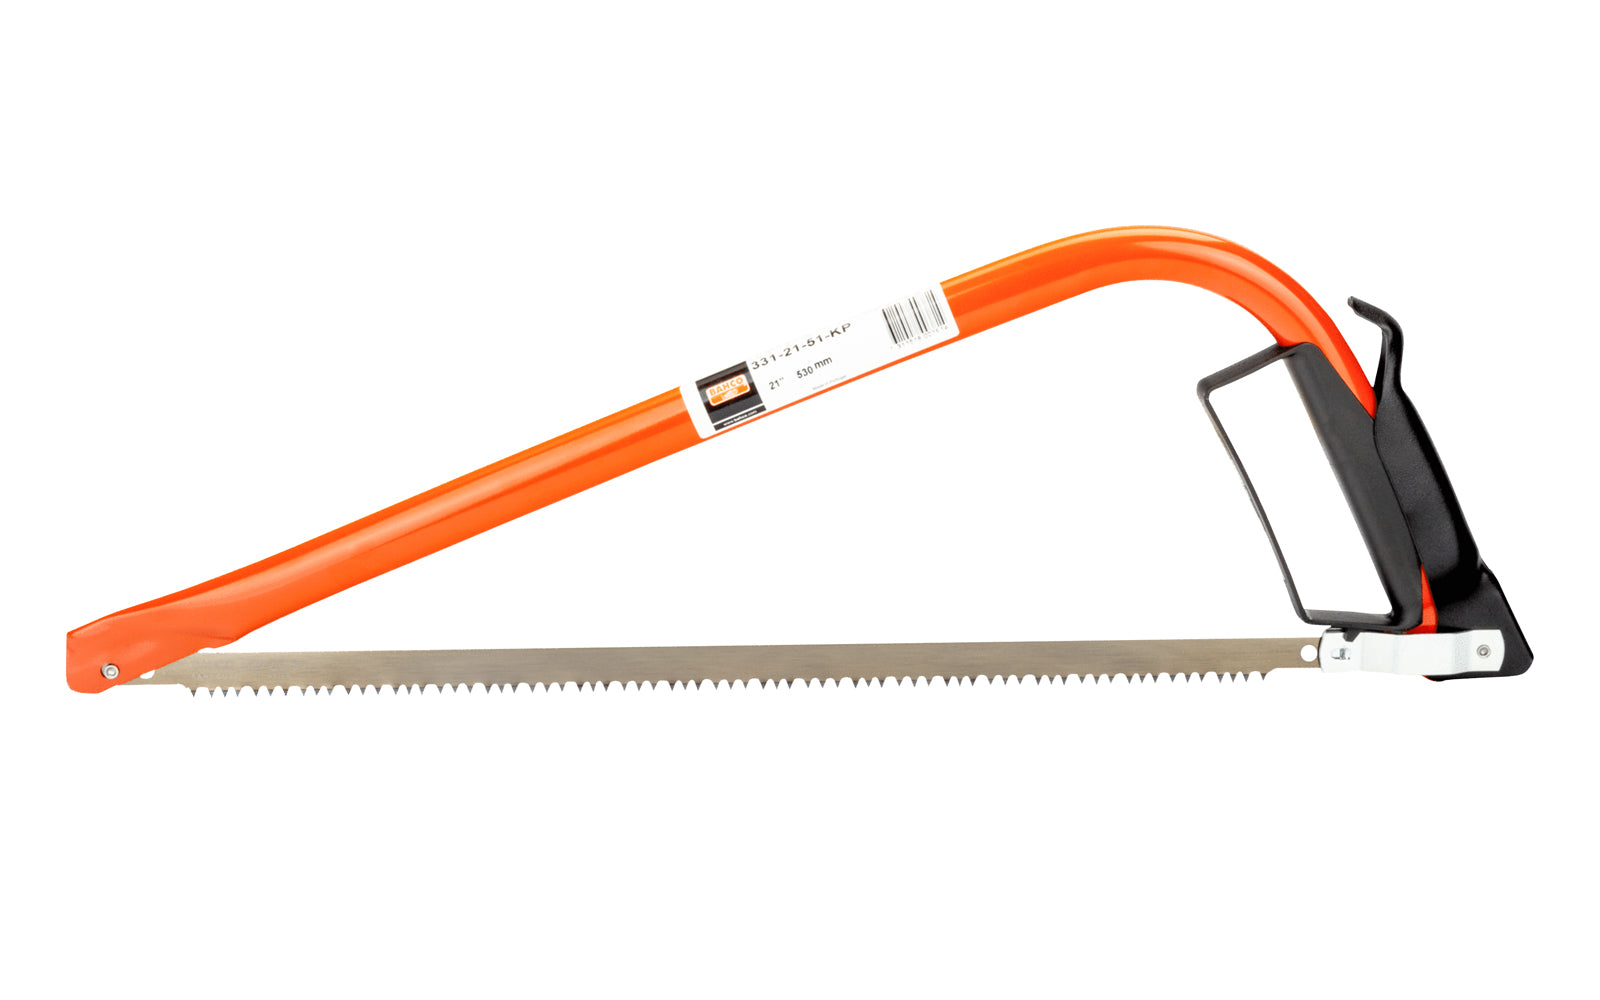 This Bahco 21" Bow Saw has a pointed nose which makes the saw ideal for use in tight spaces & well-suited for pruning. Includes Bahco type 51 blade designed for cutting dry wood. 21" (530 mm) cutting edge length.  Made in Portugal. Model No. 331-21-51-KP. 7311518003814. Bahco 331 Bowsaw. Dry Wood Bow Saw. Green Wood